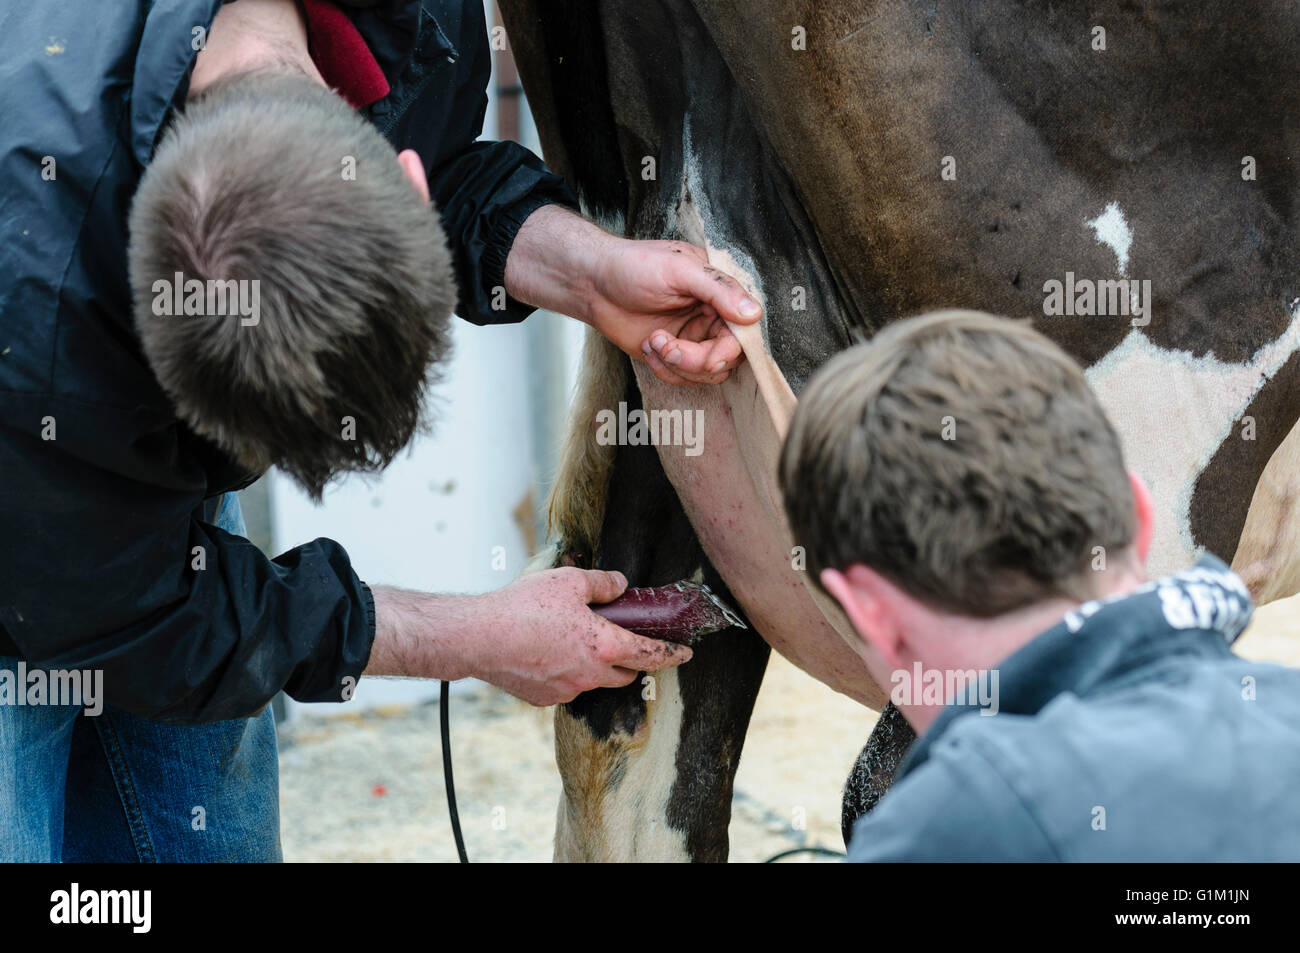 Two farmers shave the udder of a cow using an electric shaver in preparation for a show competition. Stock Photo